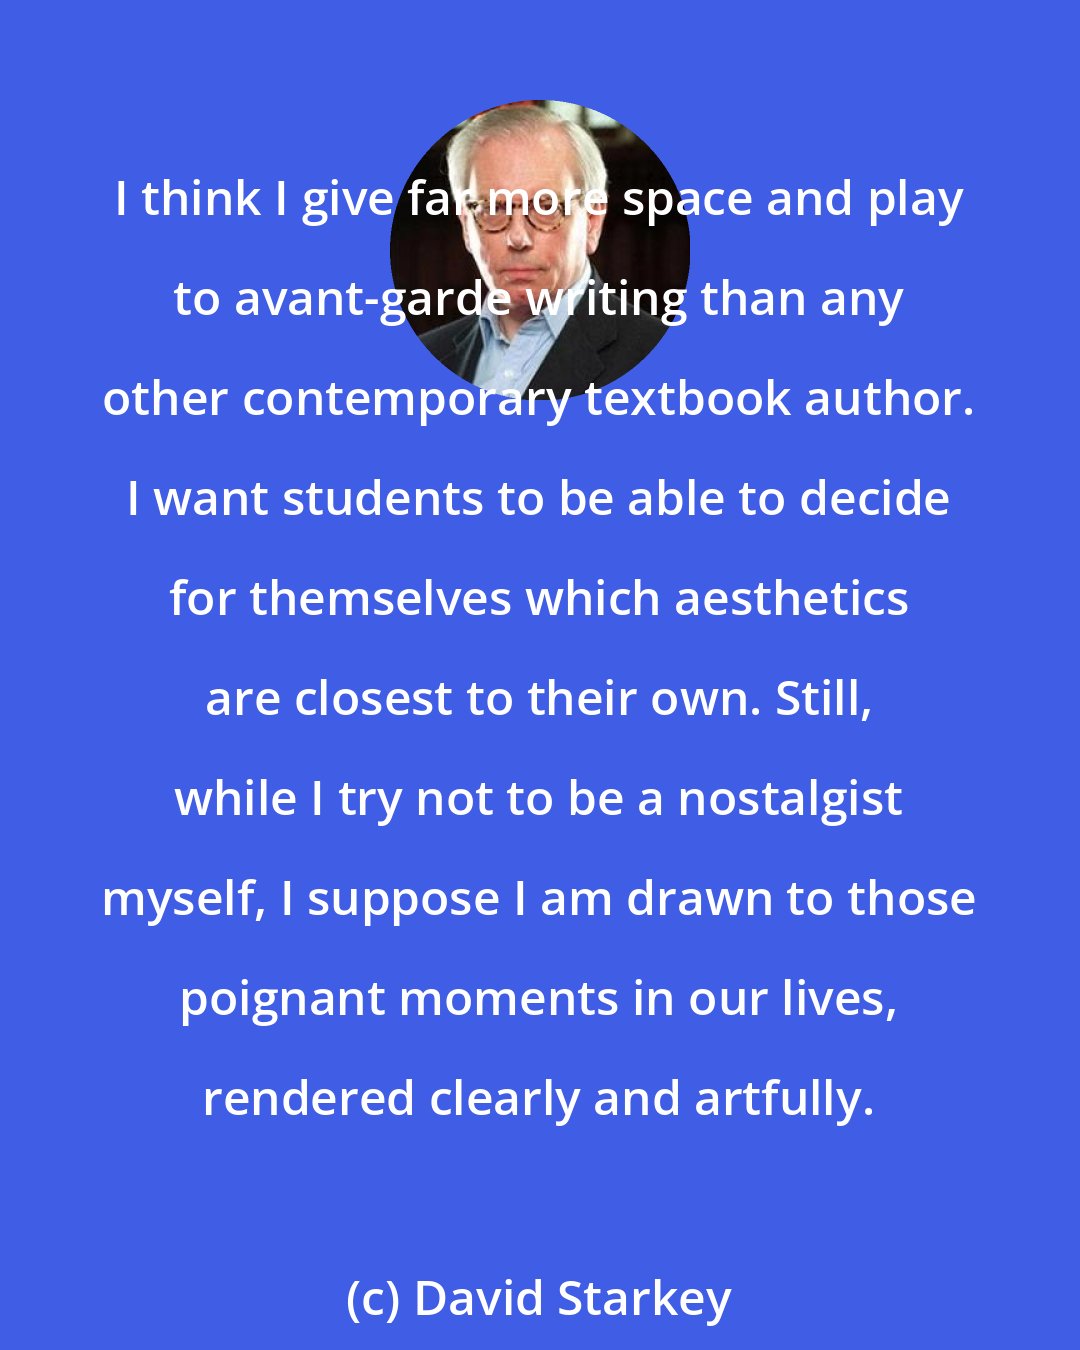 David Starkey: I think I give far more space and play to avant-garde writing than any other contemporary textbook author. I want students to be able to decide for themselves which aesthetics are closest to their own. Still, while I try not to be a nostalgist myself, I suppose I am drawn to those poignant moments in our lives, rendered clearly and artfully.